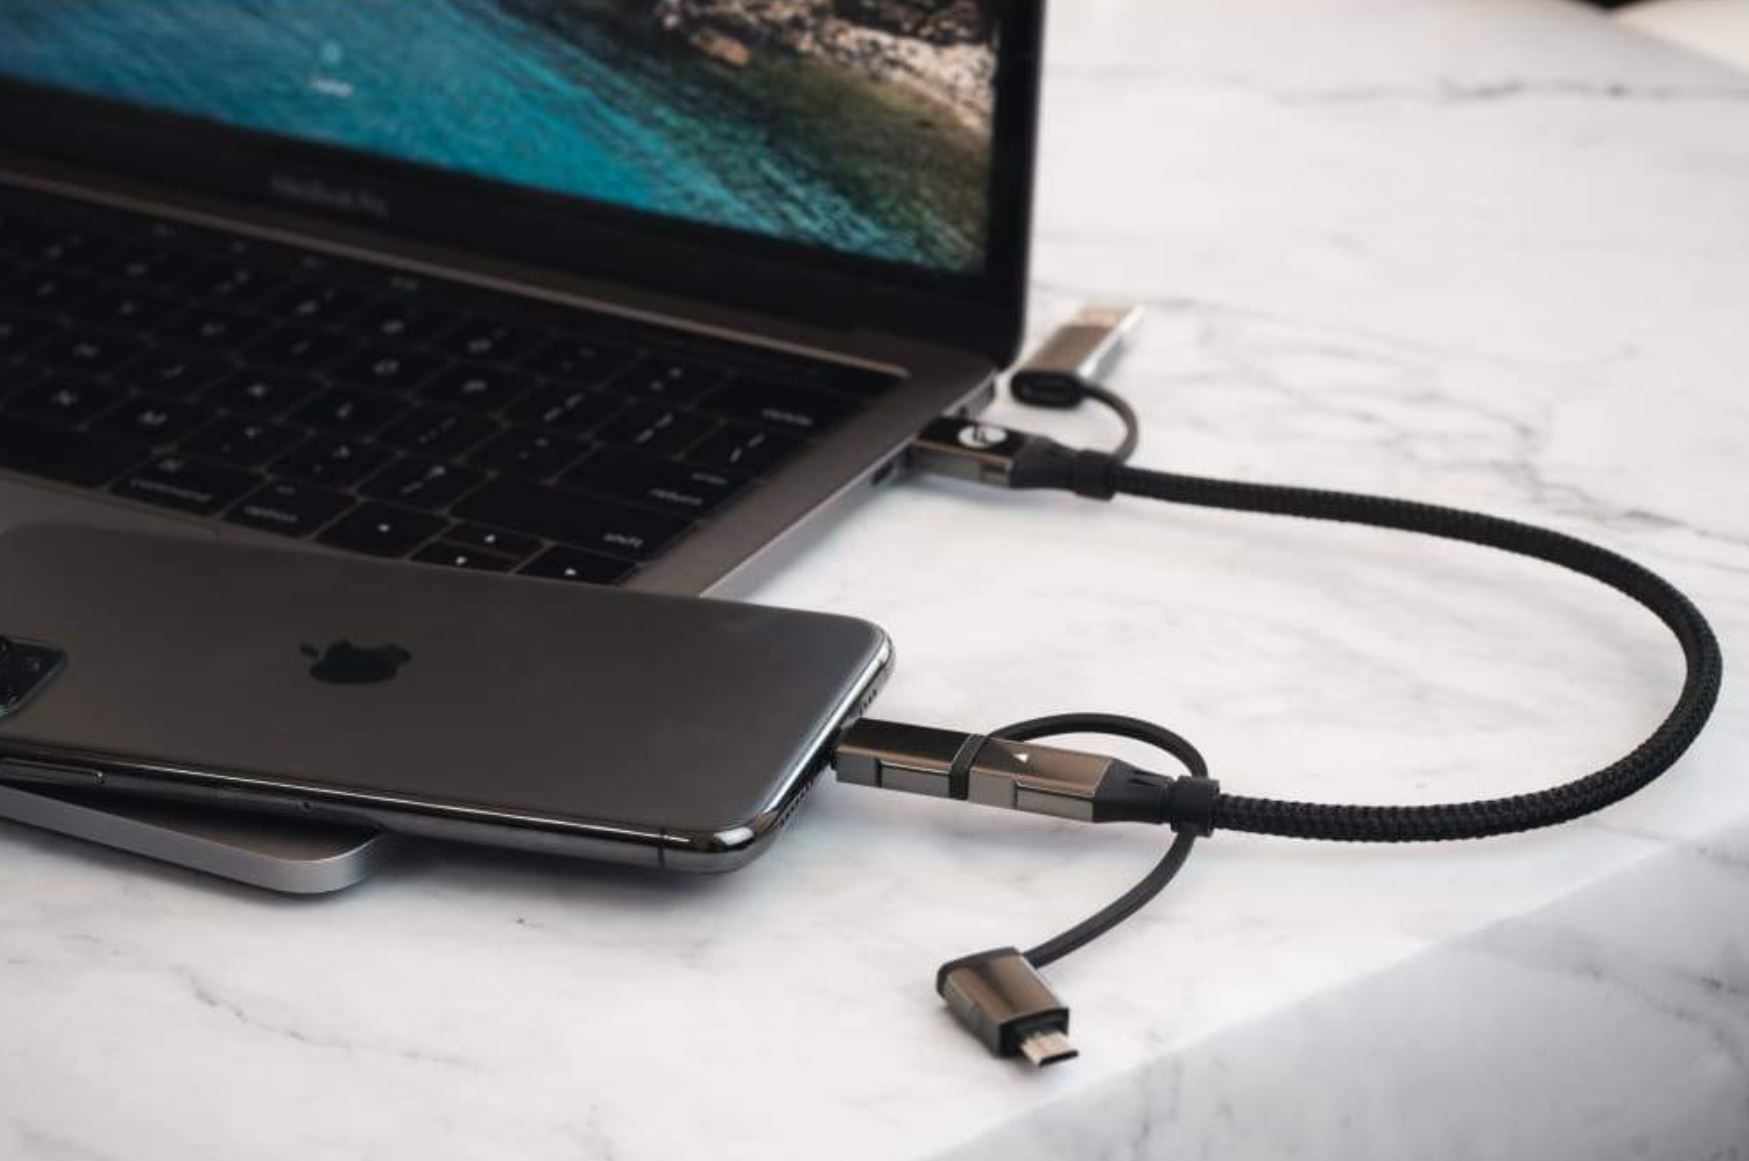 USB and Thunderbolt cables made easy (guide)